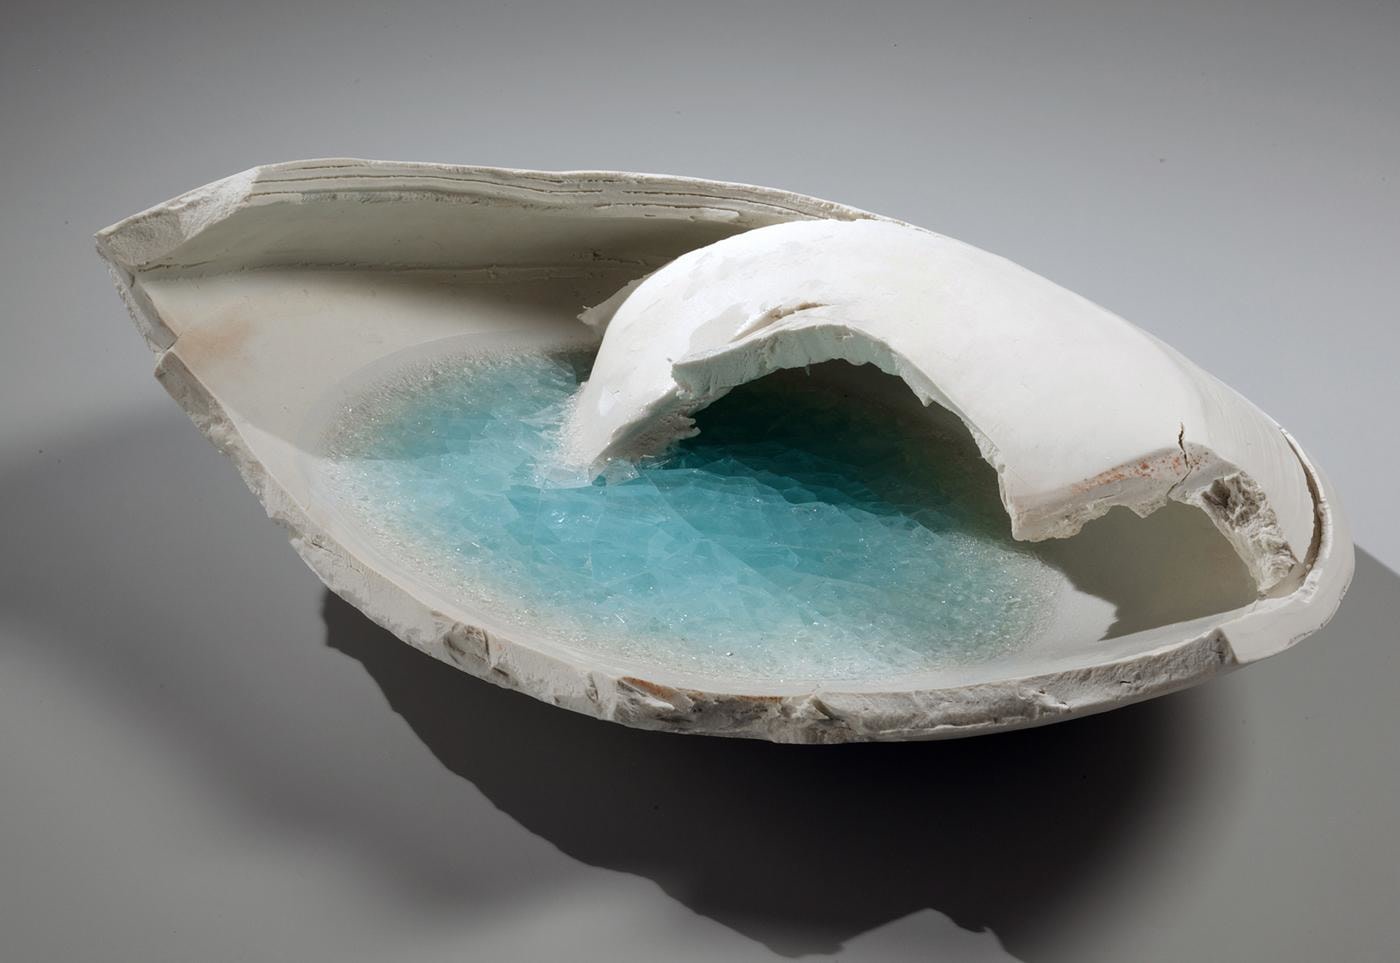 Torn, pointed oval-shaped vessel fragment with pooling of blue-green, translucent crackled glass, 2014